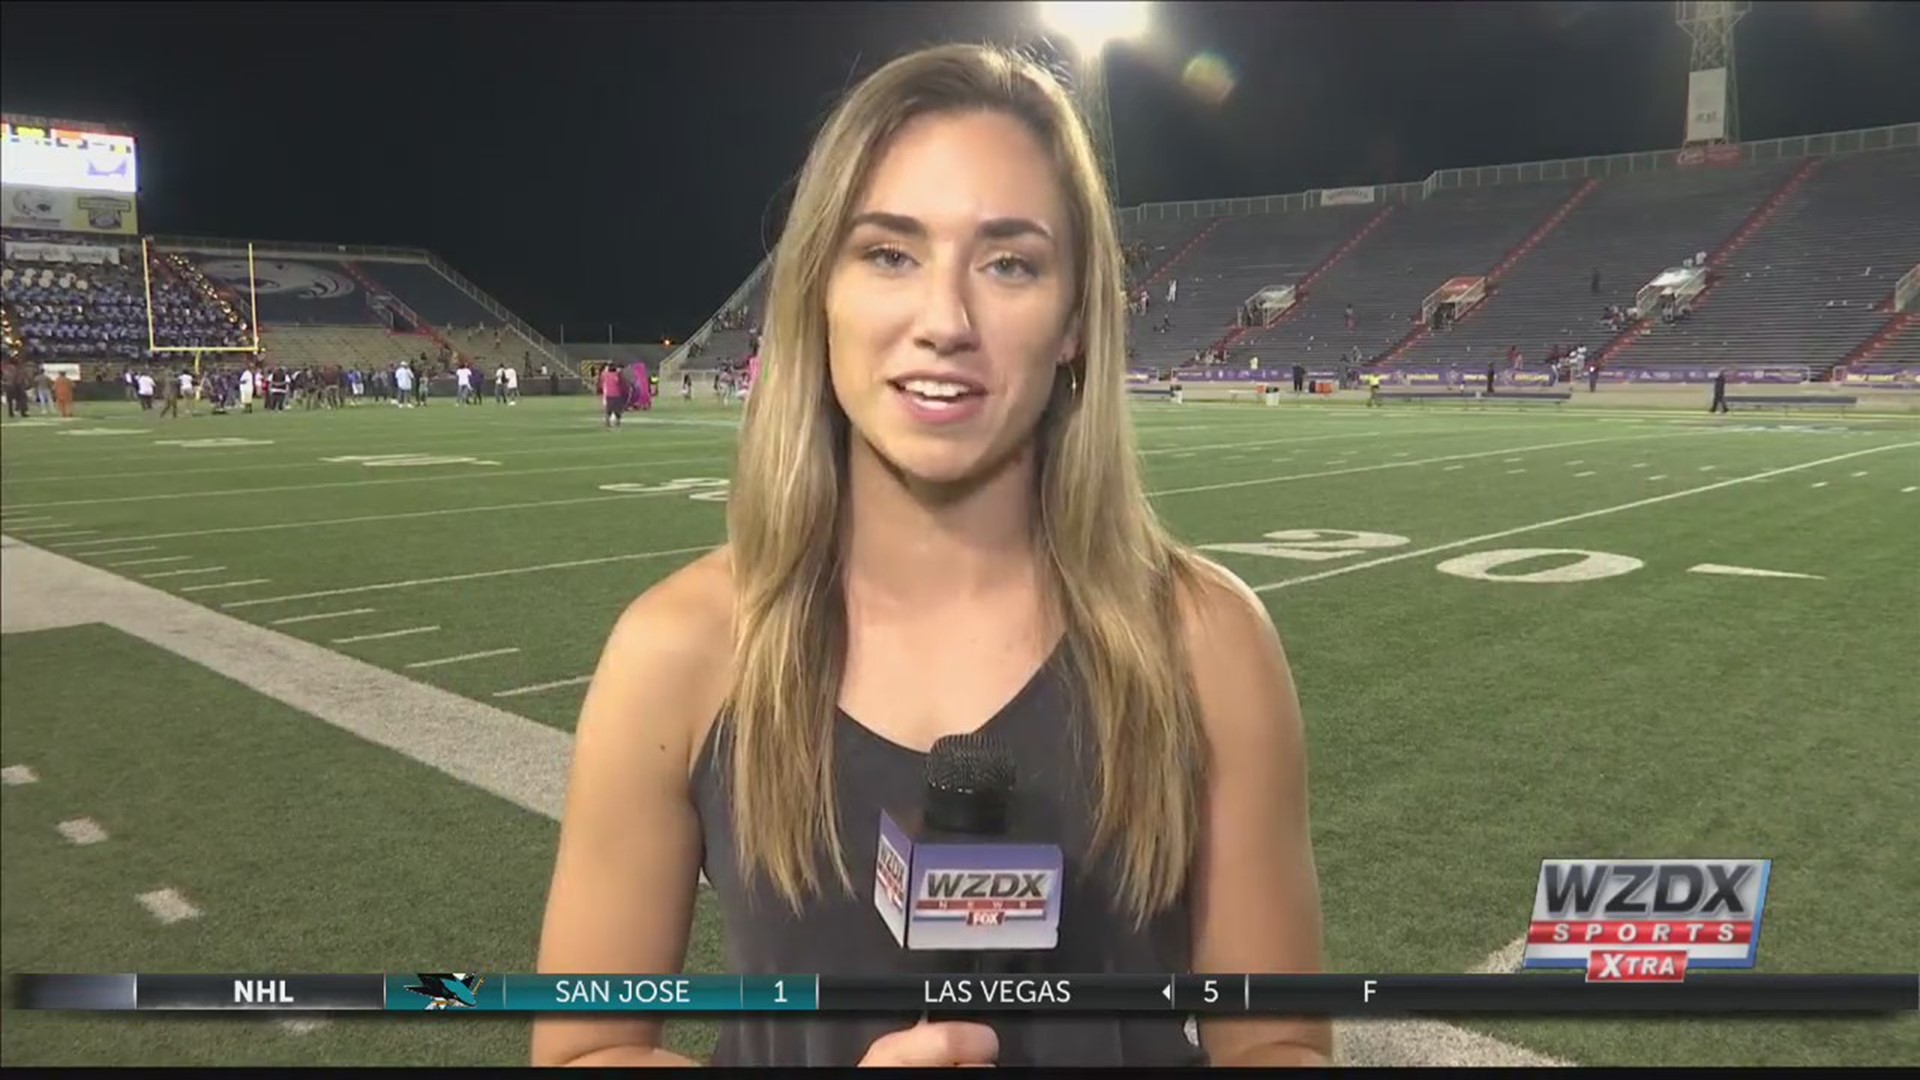 Alabama A&M got back in the win column with a victory over Central State. WZDX Sports Reporter Kayla Carlile traveled to Mobile and provided a recap of this contest.